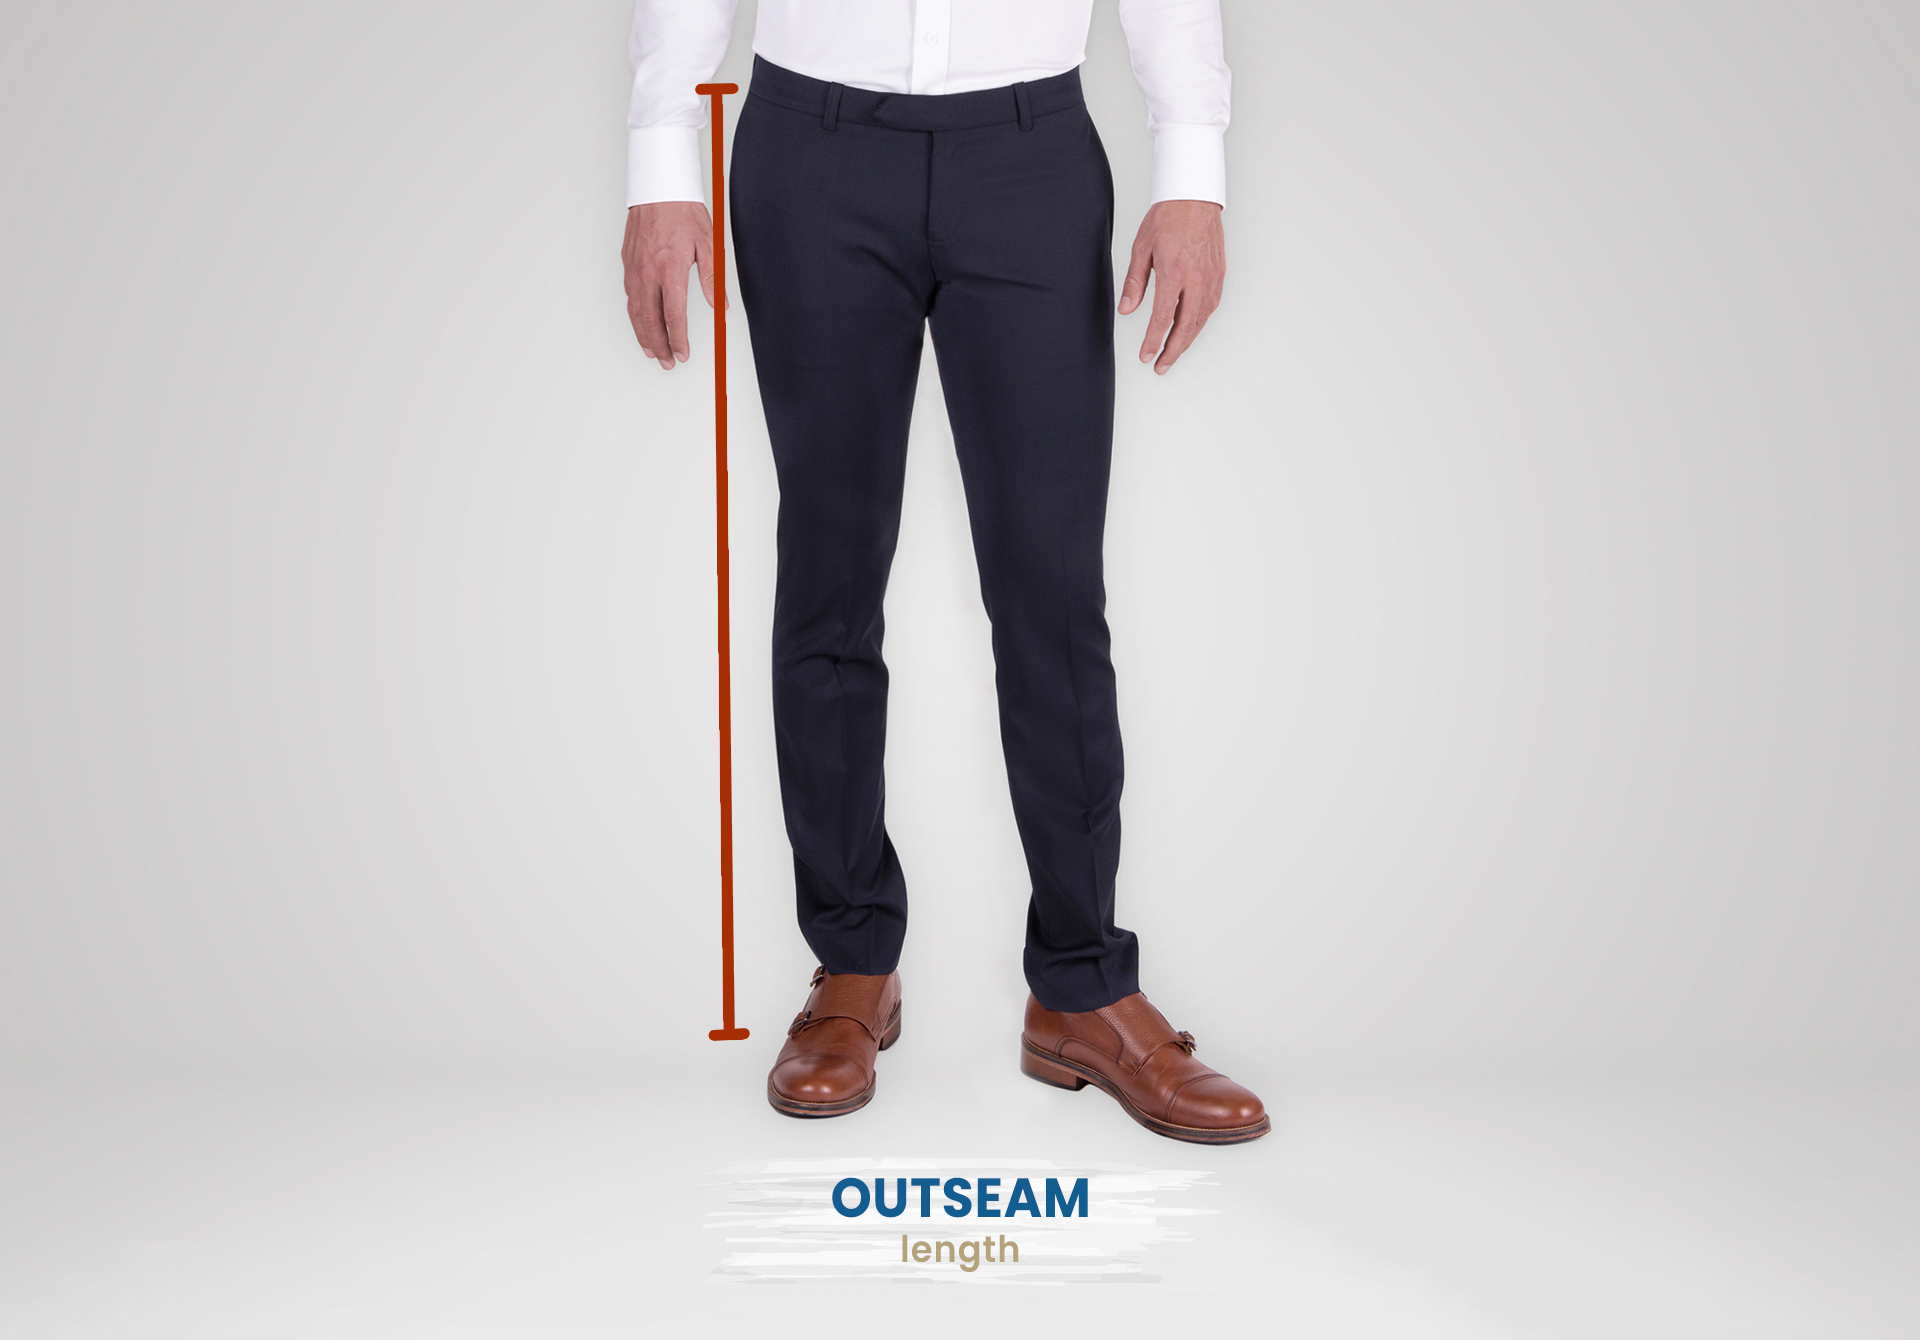 pant rise measured with outseam length